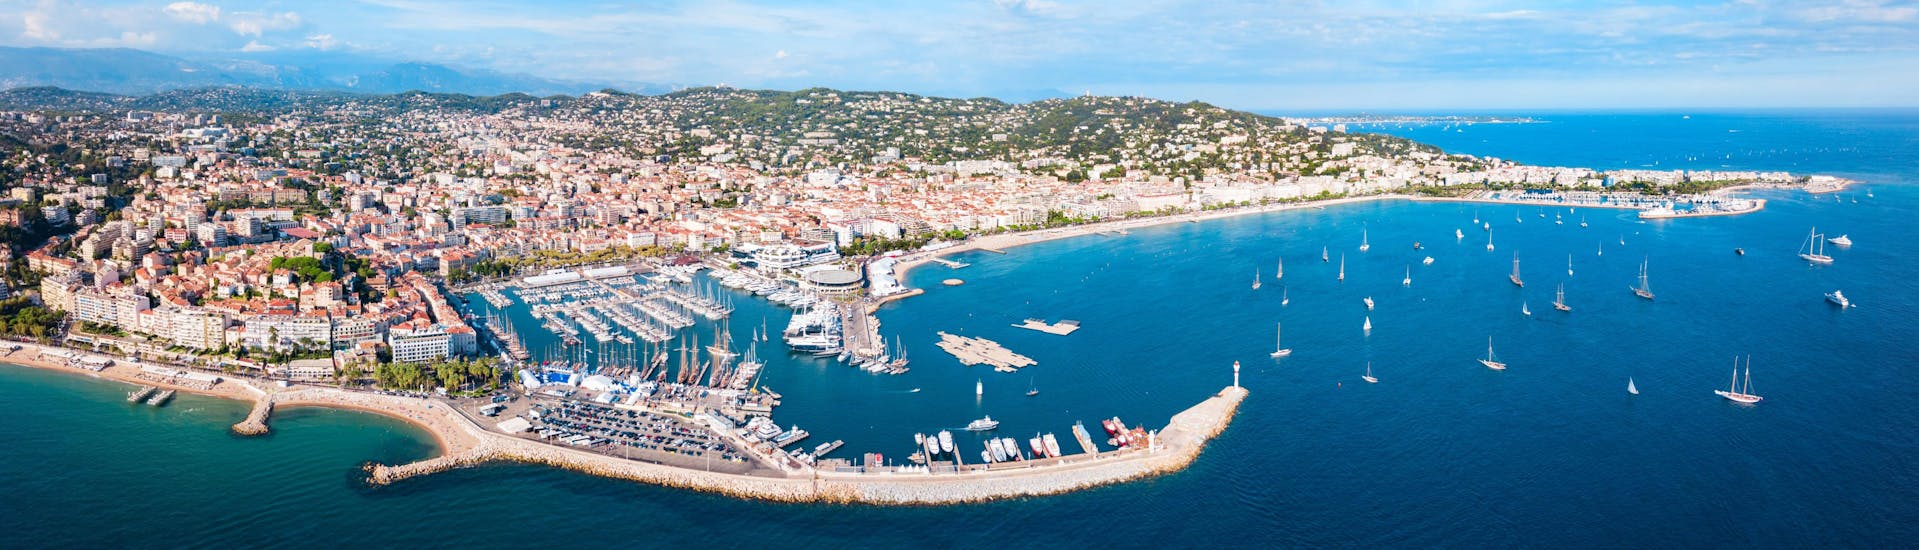 Photo of Cannes in France where you can book boat trips.